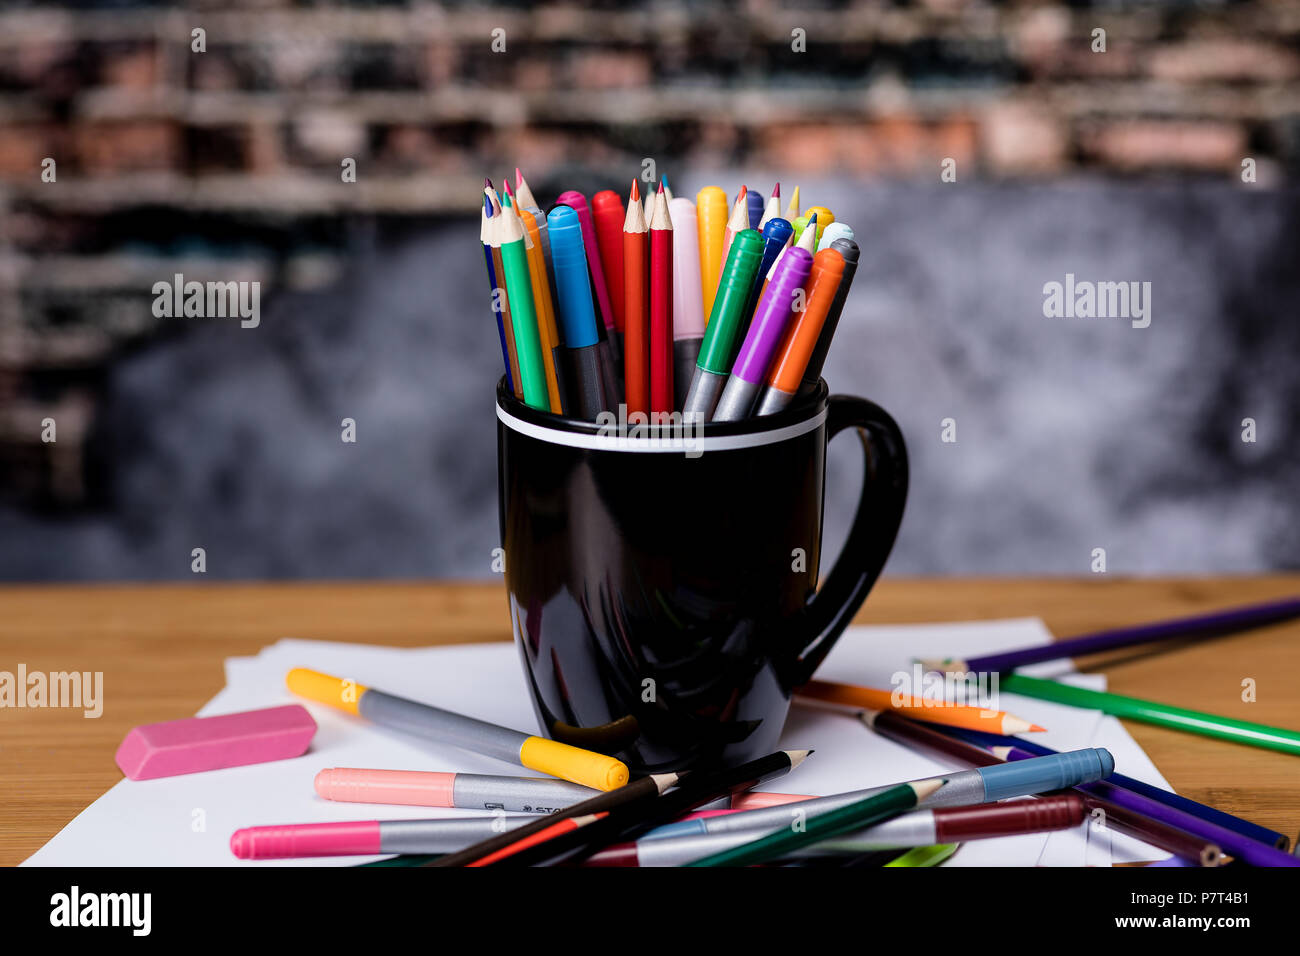 Colored pencils and markers against each other Stock Photo by ©Popoudina  81852286